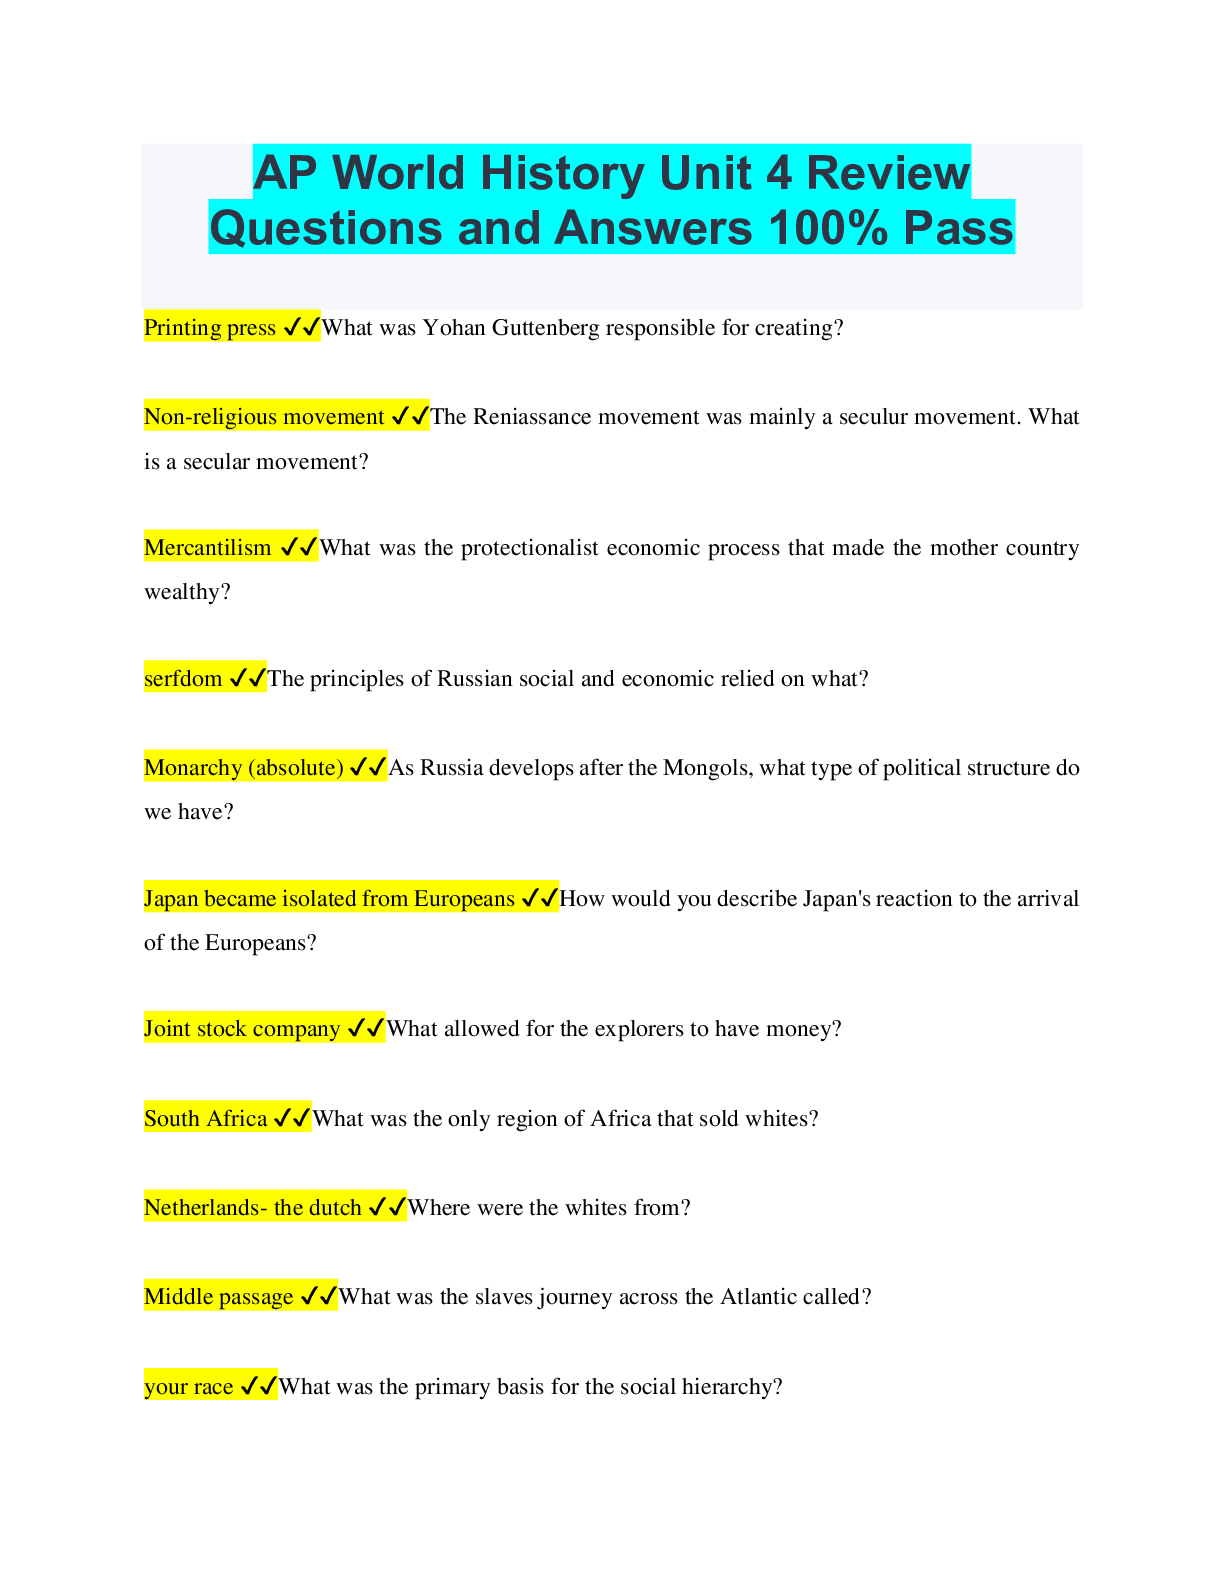 AP World History Unit 4 Review Questions and Answers 100 Pass